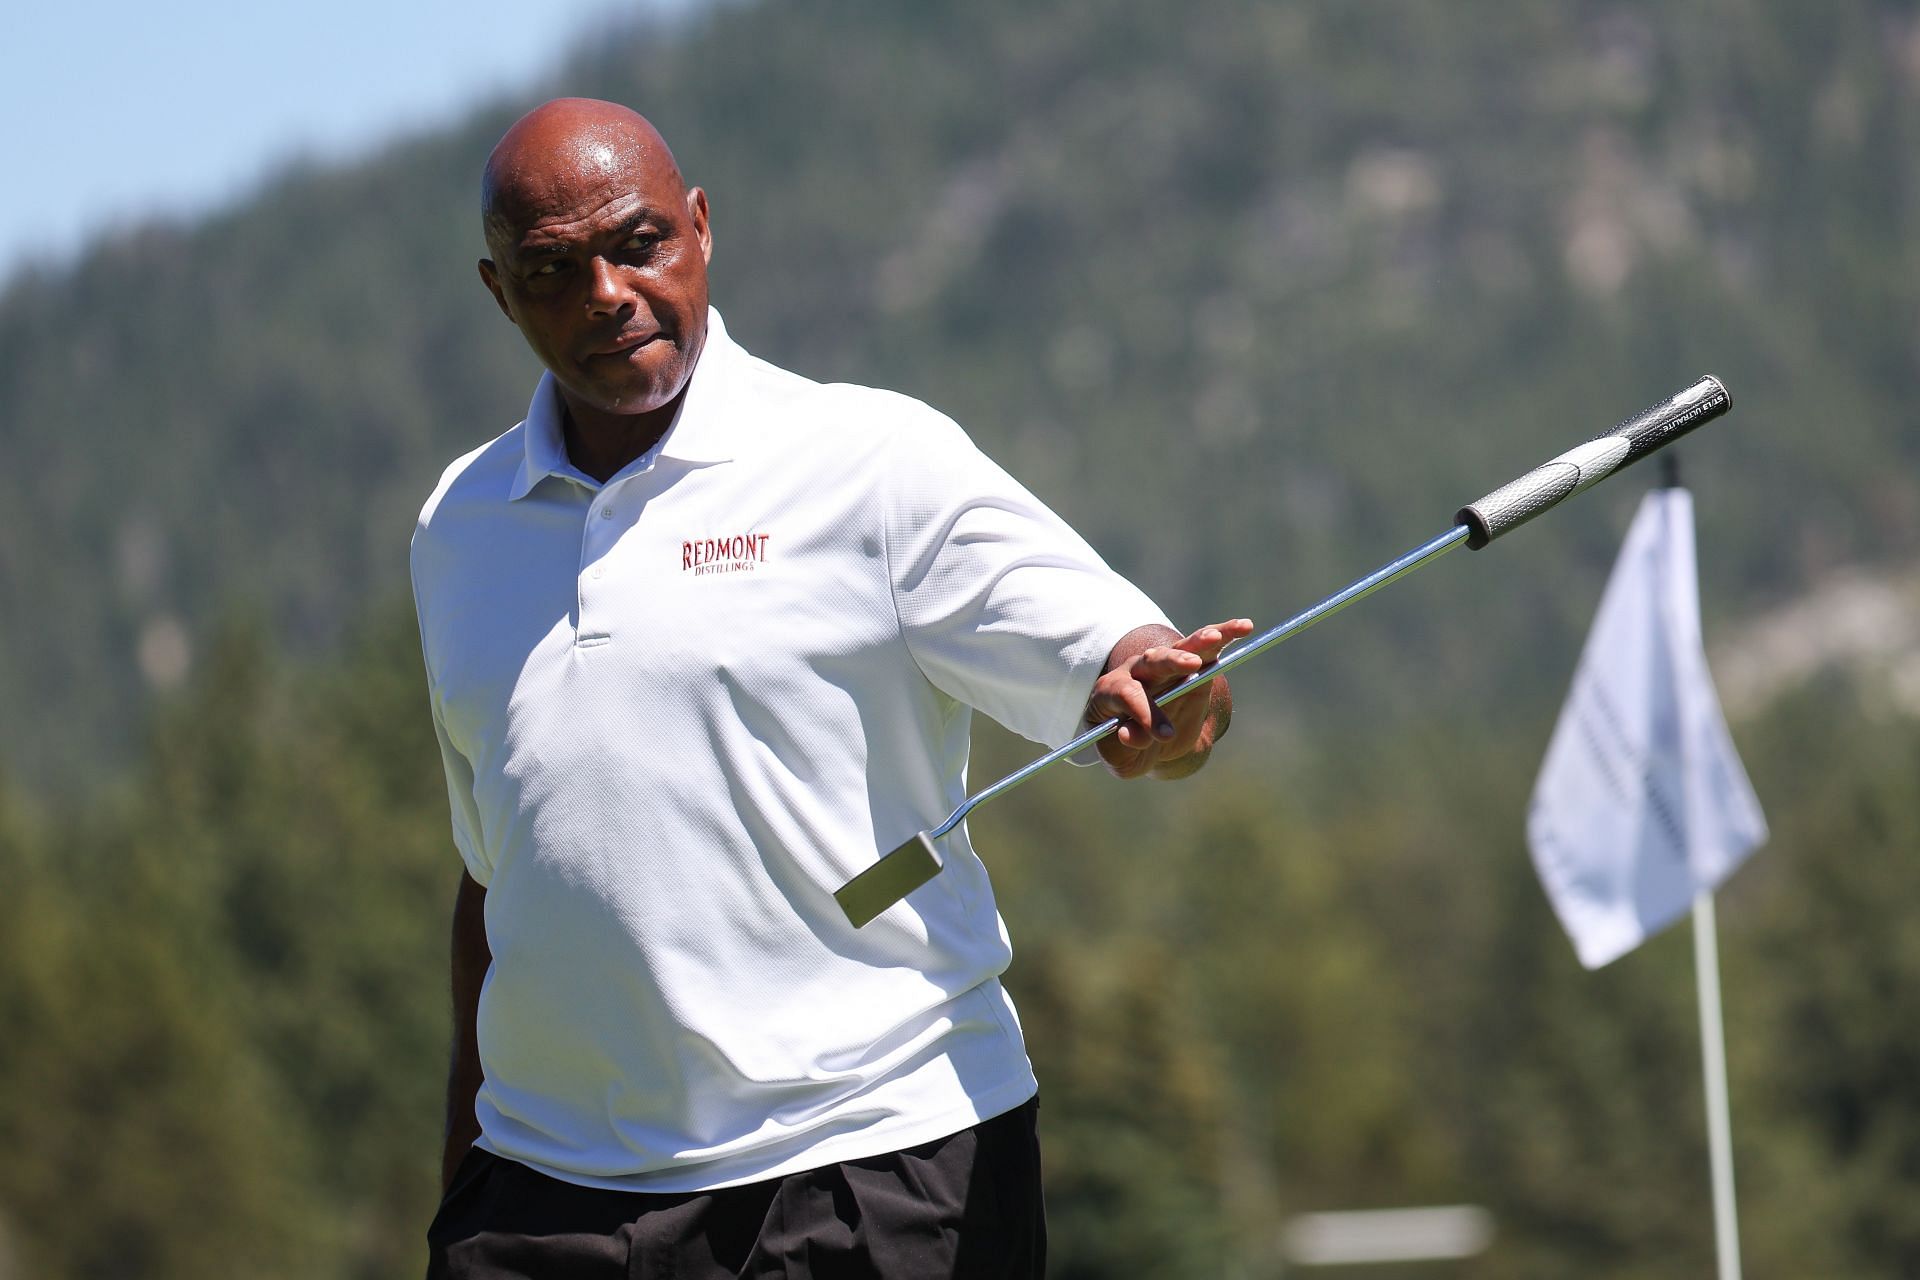 Charles Barkley had a disappointing outing at the Lake Tahoe Celebrity Golf Tournament